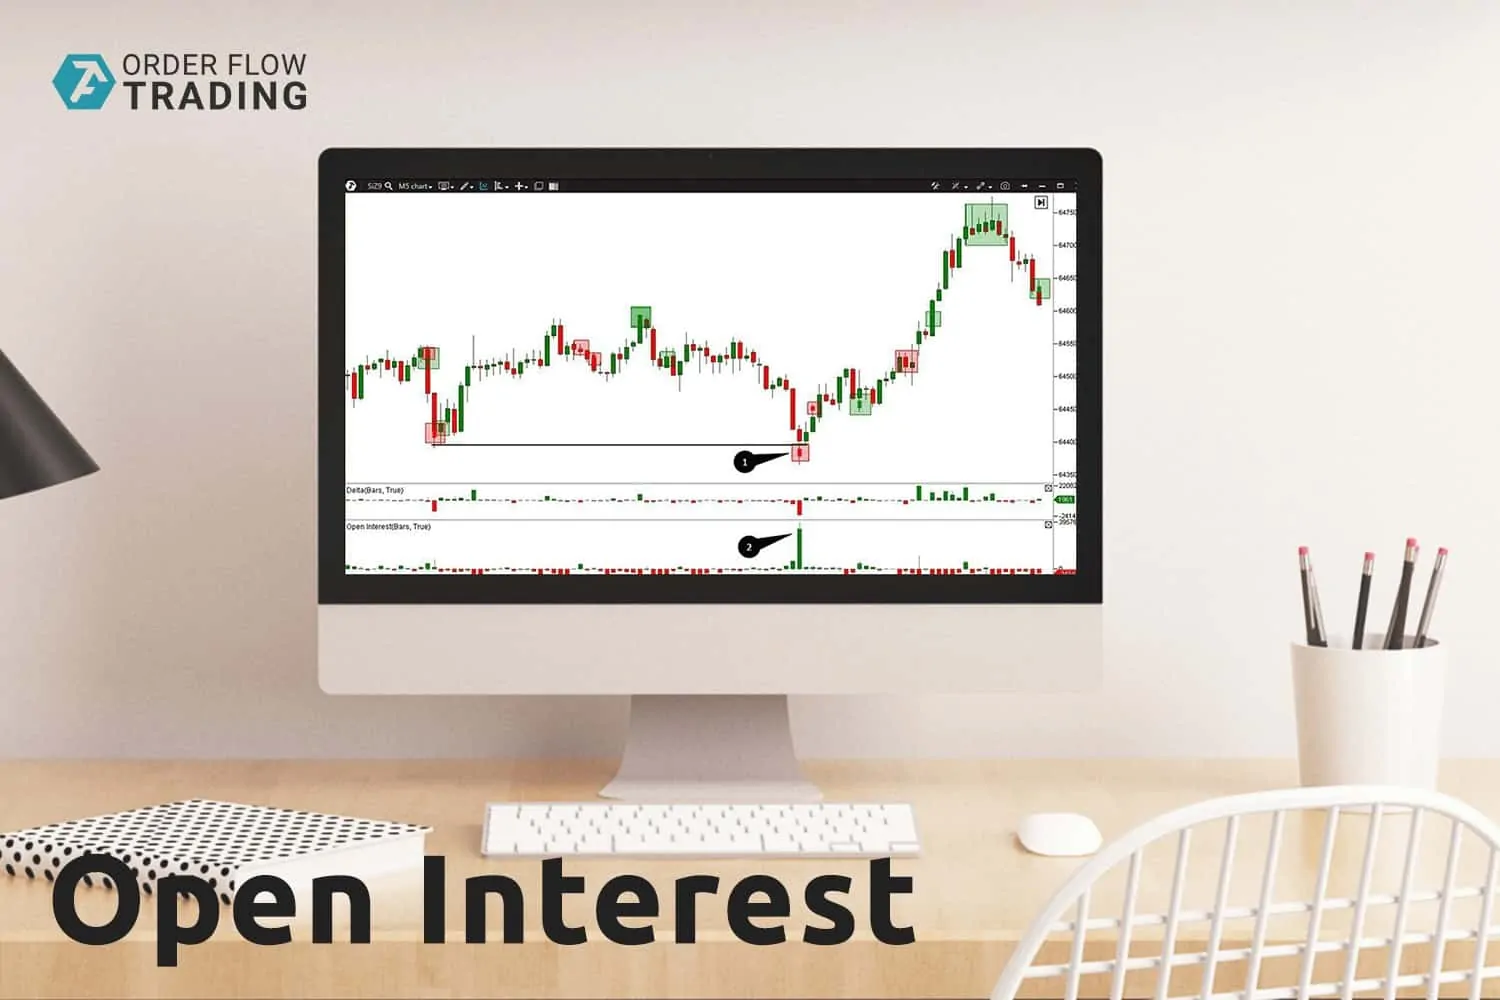 Open Interest. How to use it in trading?